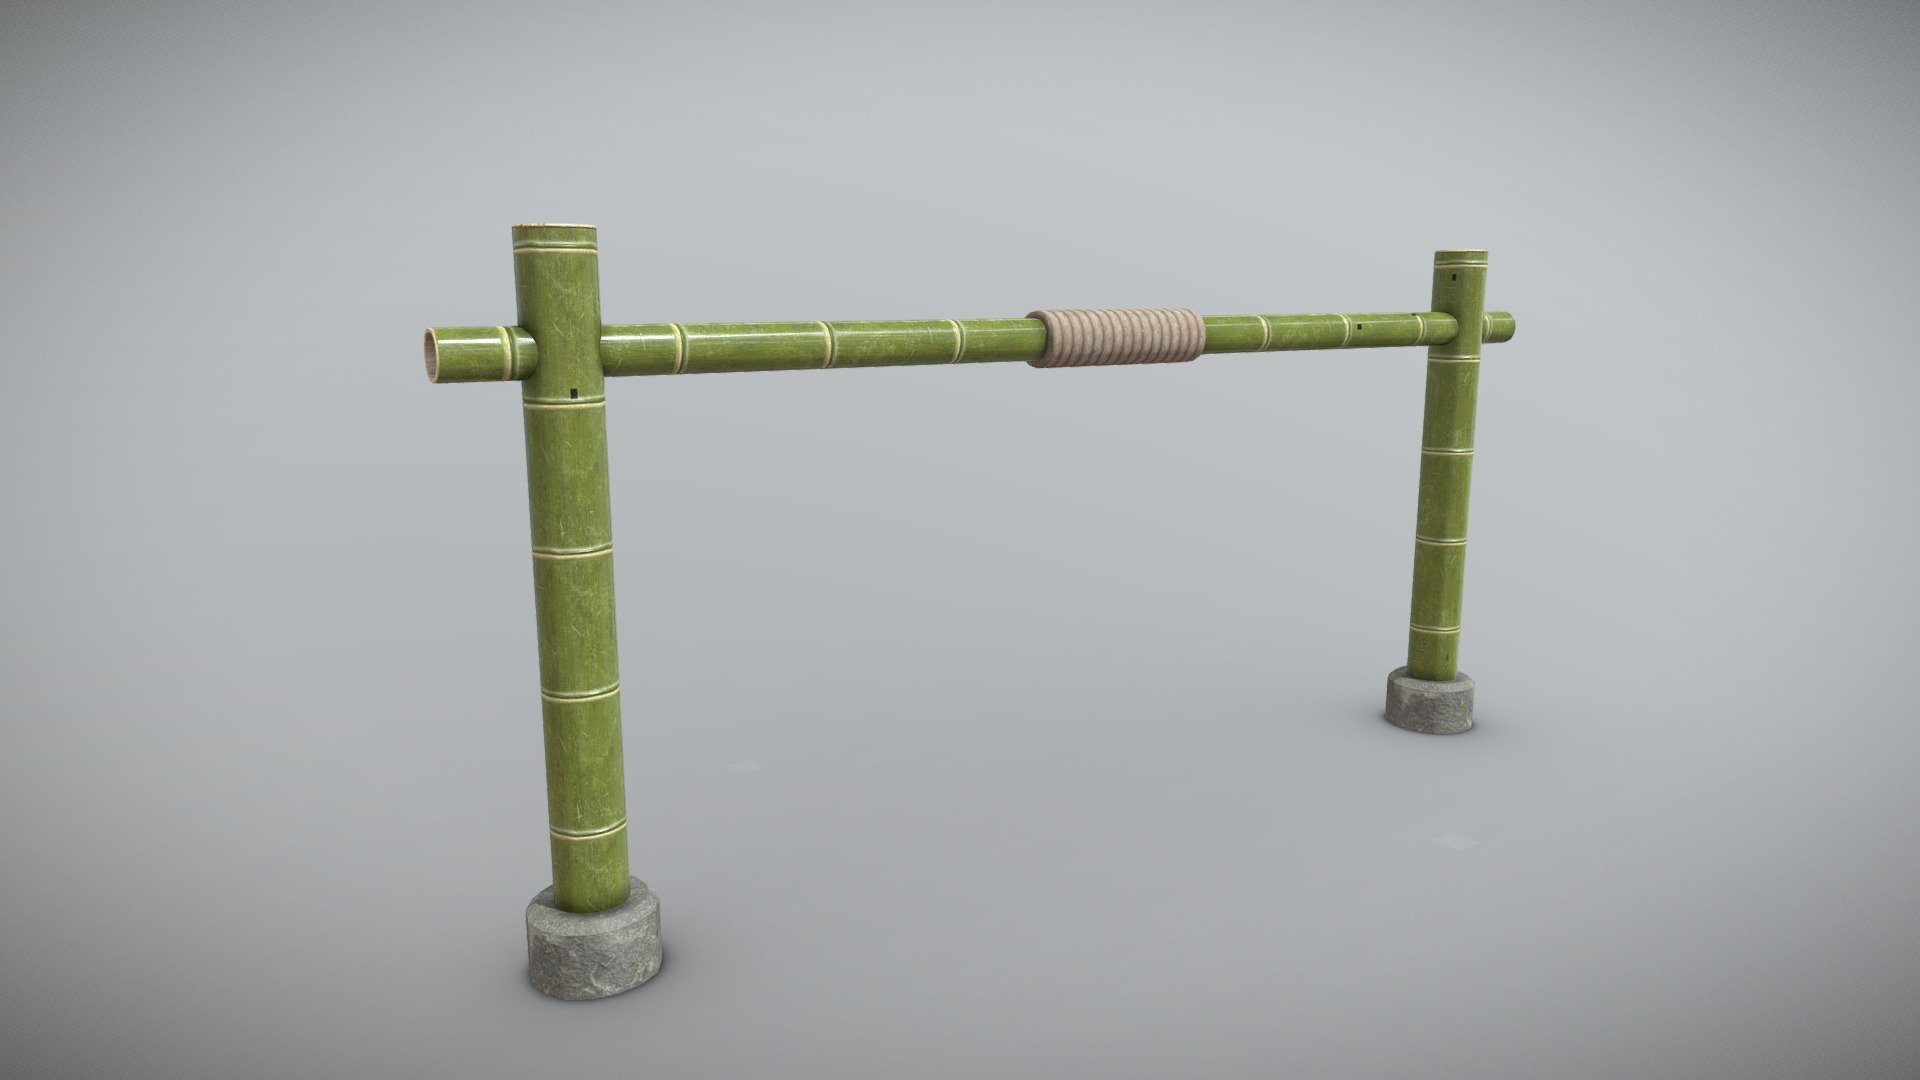 Natural Bamboo - Binding Cane 

Made in Blender and textured in Substance Painter

Used 2x 1024x1024 material slots 3d model